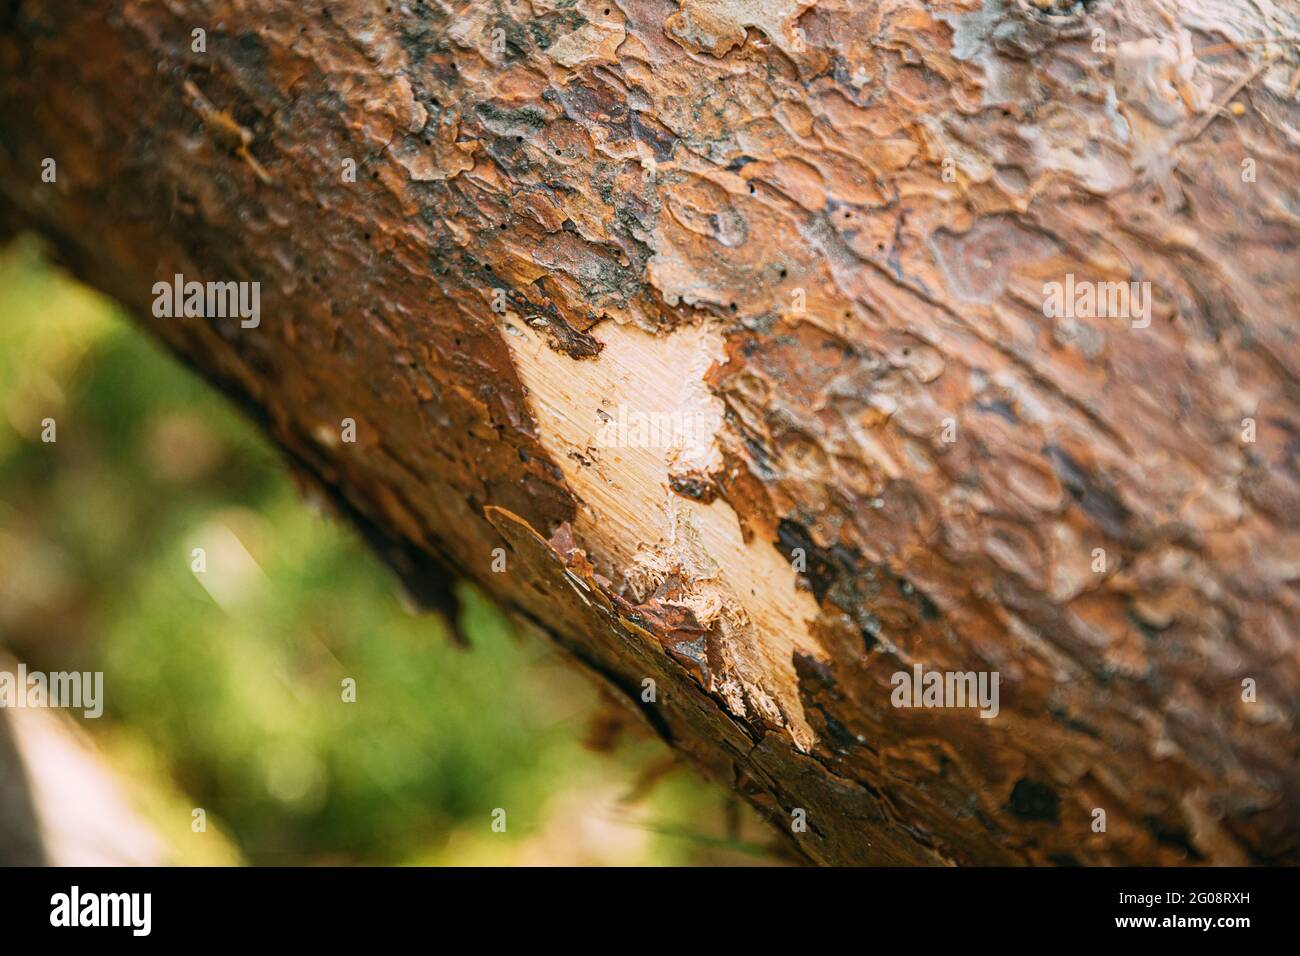 Close View Of Bear Claw Marks On Fallen Pine Tree. Detail Stock Photo